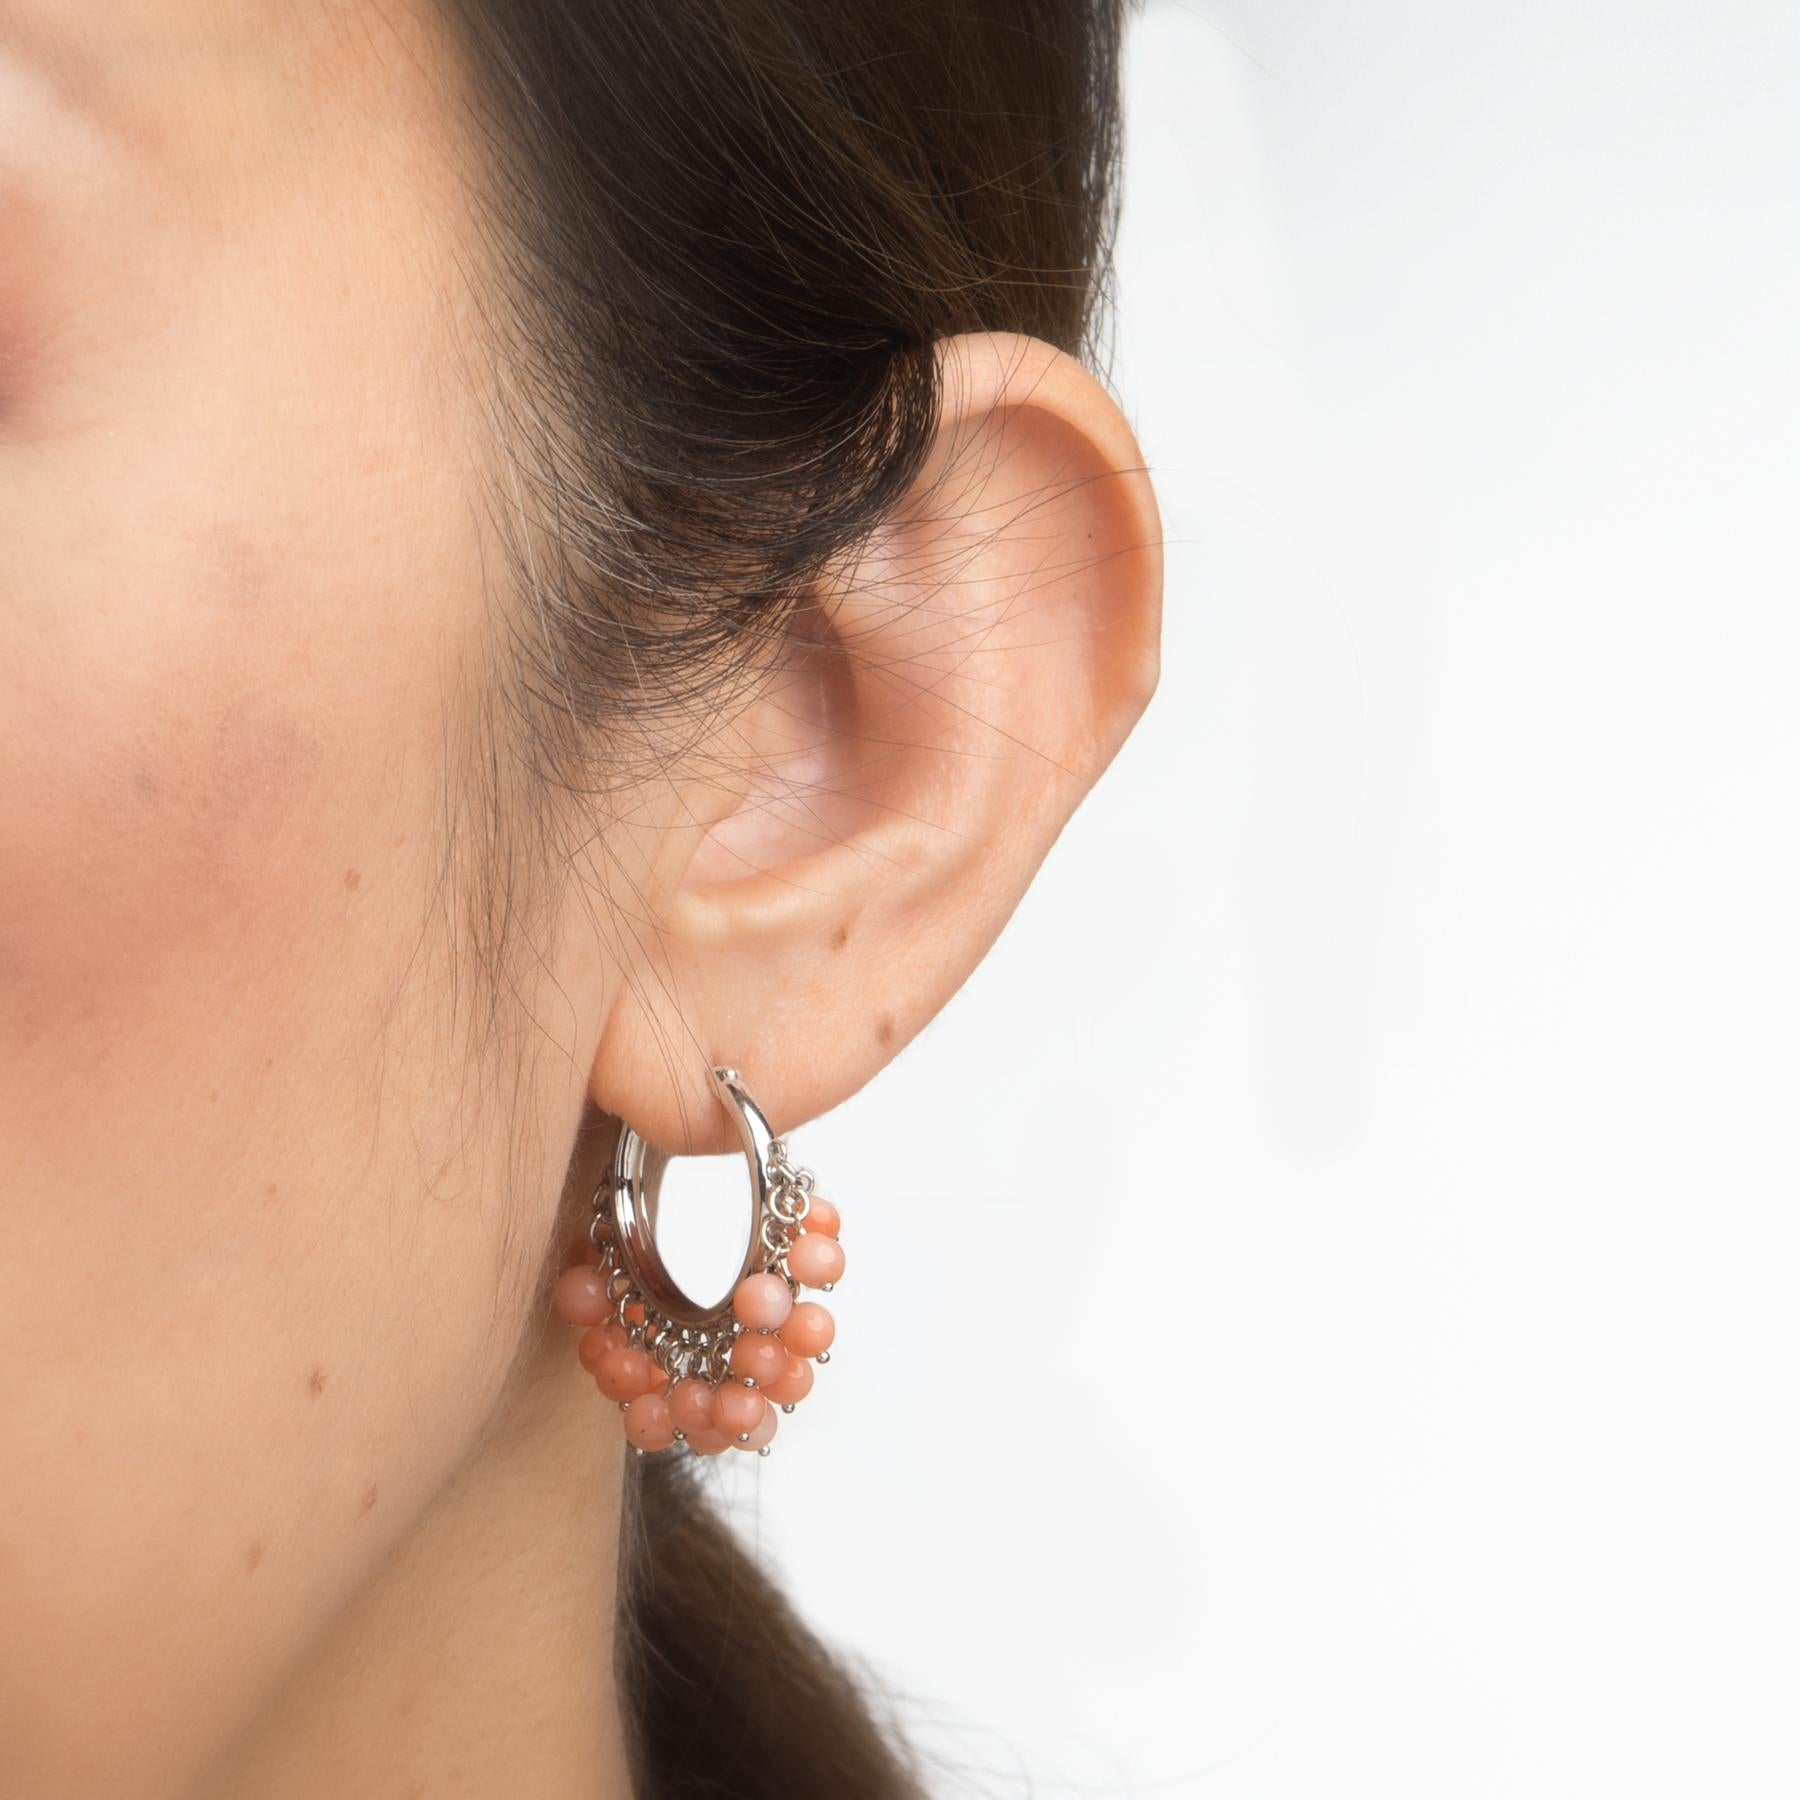 Elegant pair of estate coral hoop earrings, crafted in 18k white gold. 

Coral is attached to both bases of the hoop earrings measuring (average) 4mm. The coral is in excellent condition and free of cracks or chips. 

The stylish hoop earrings are